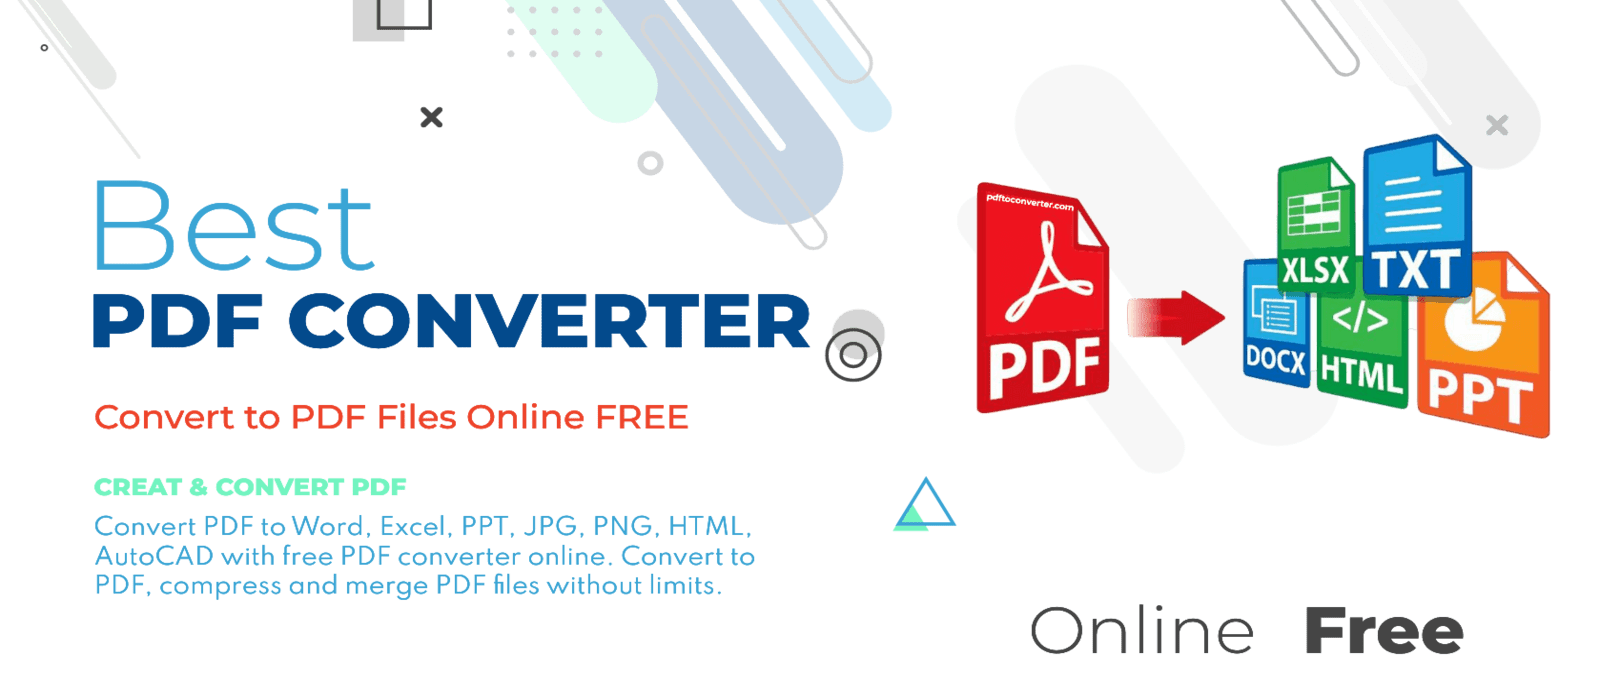 Convert files to and from PDF format effortlessly with PDFtoConverter. Create, convert, and merge PDFs with ease. Experience the best PDF conversion tool